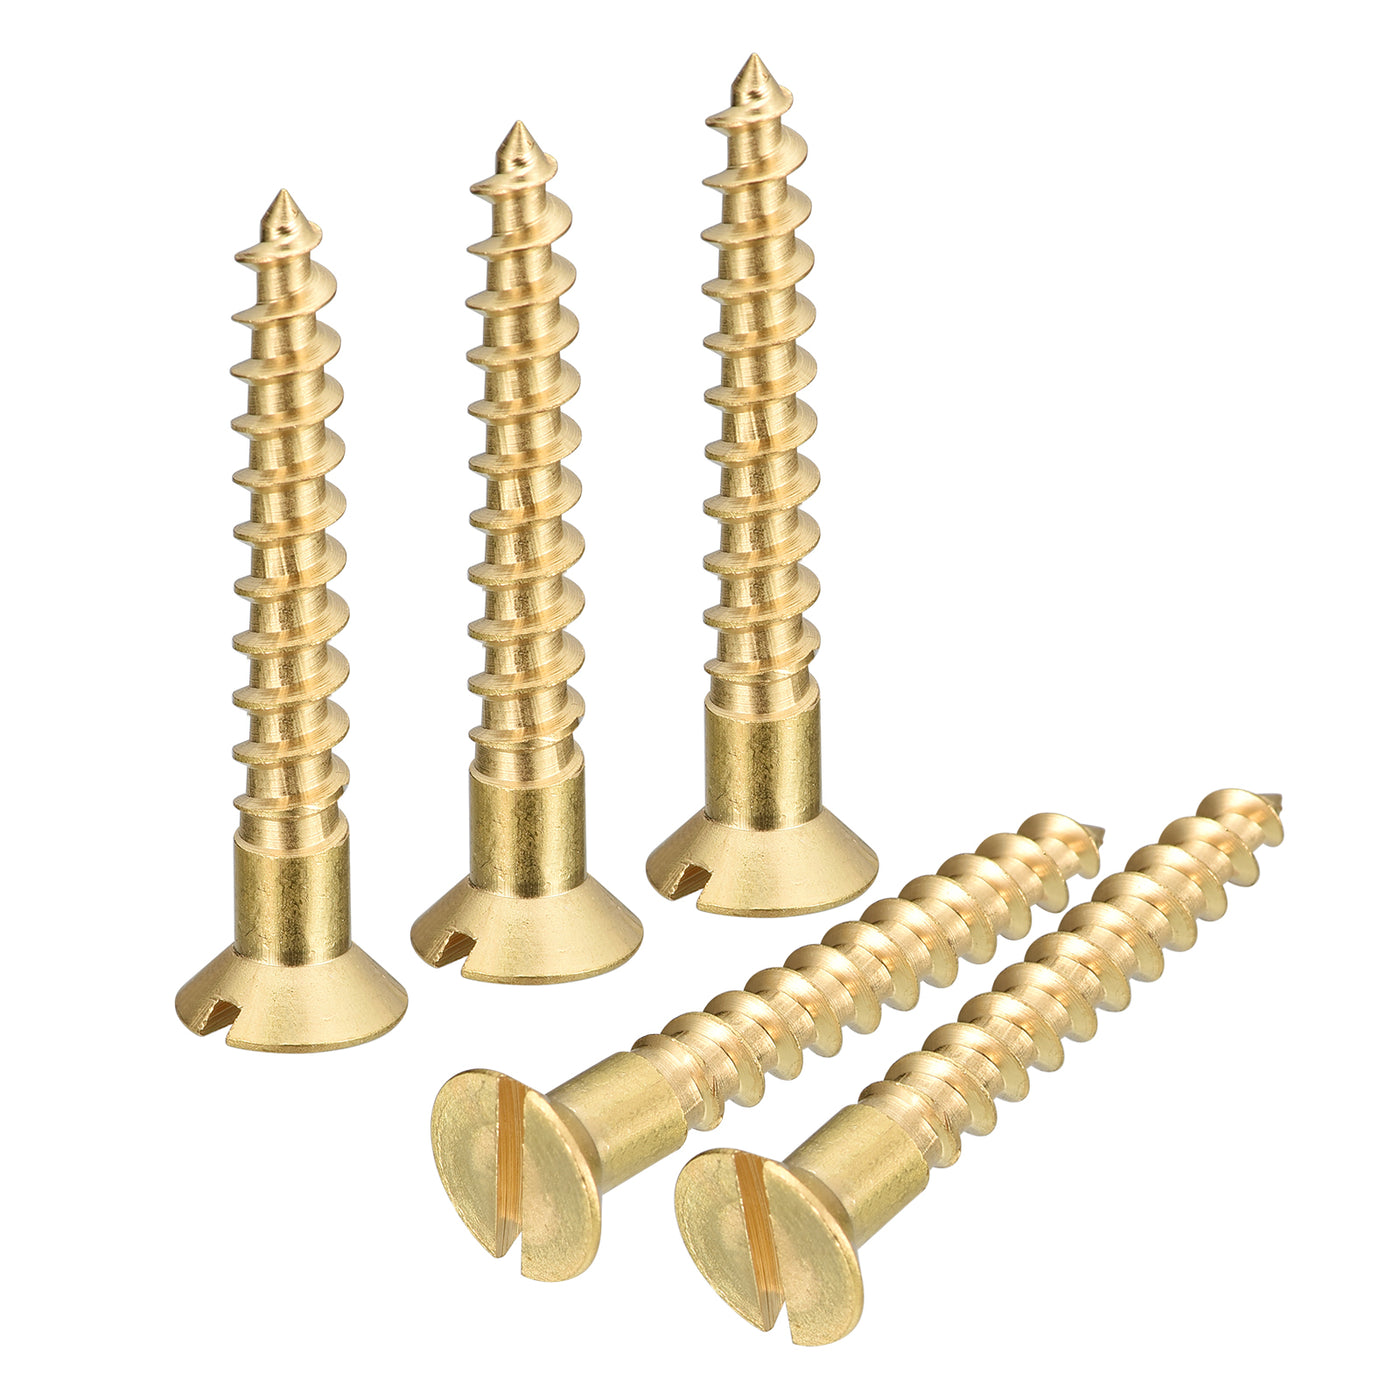 uxcell Uxcell 50Pcs M5 x 35mm Brass Slotted Drive Flat Head Wood Screws Self Tapping Screw